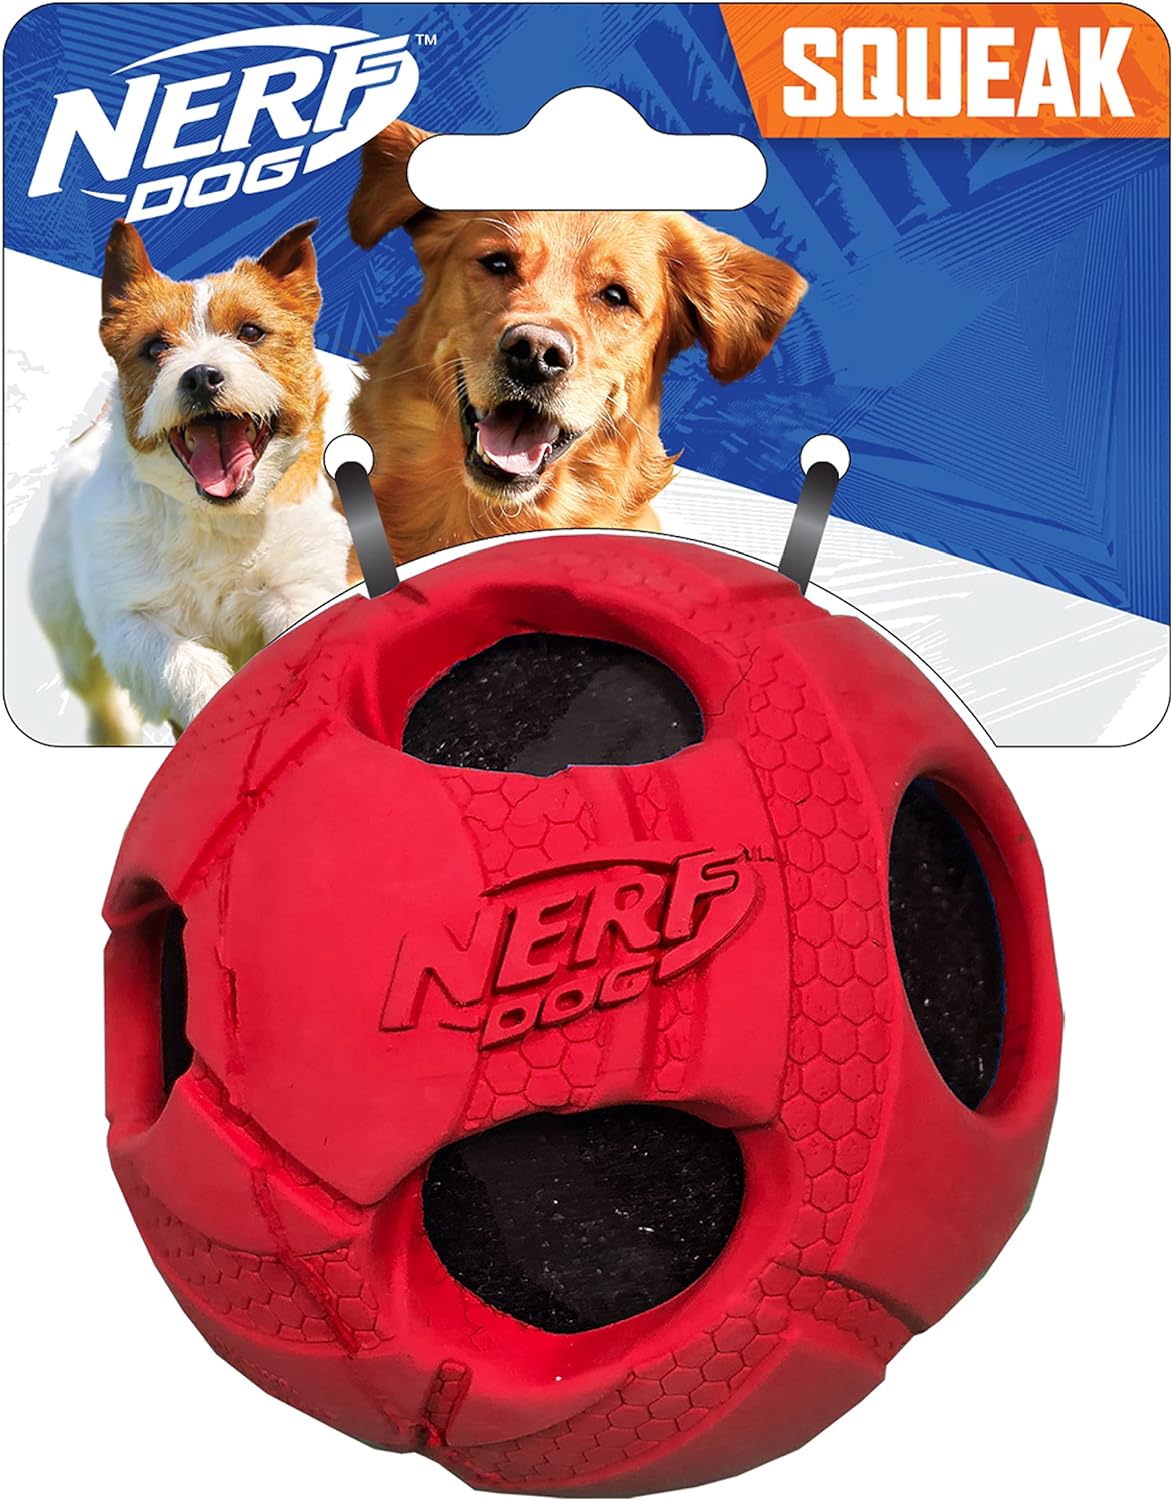 Nerf Dog 1484 Red Rubber Wrapped Bash Tennis Ball Squeak Toy, Medium